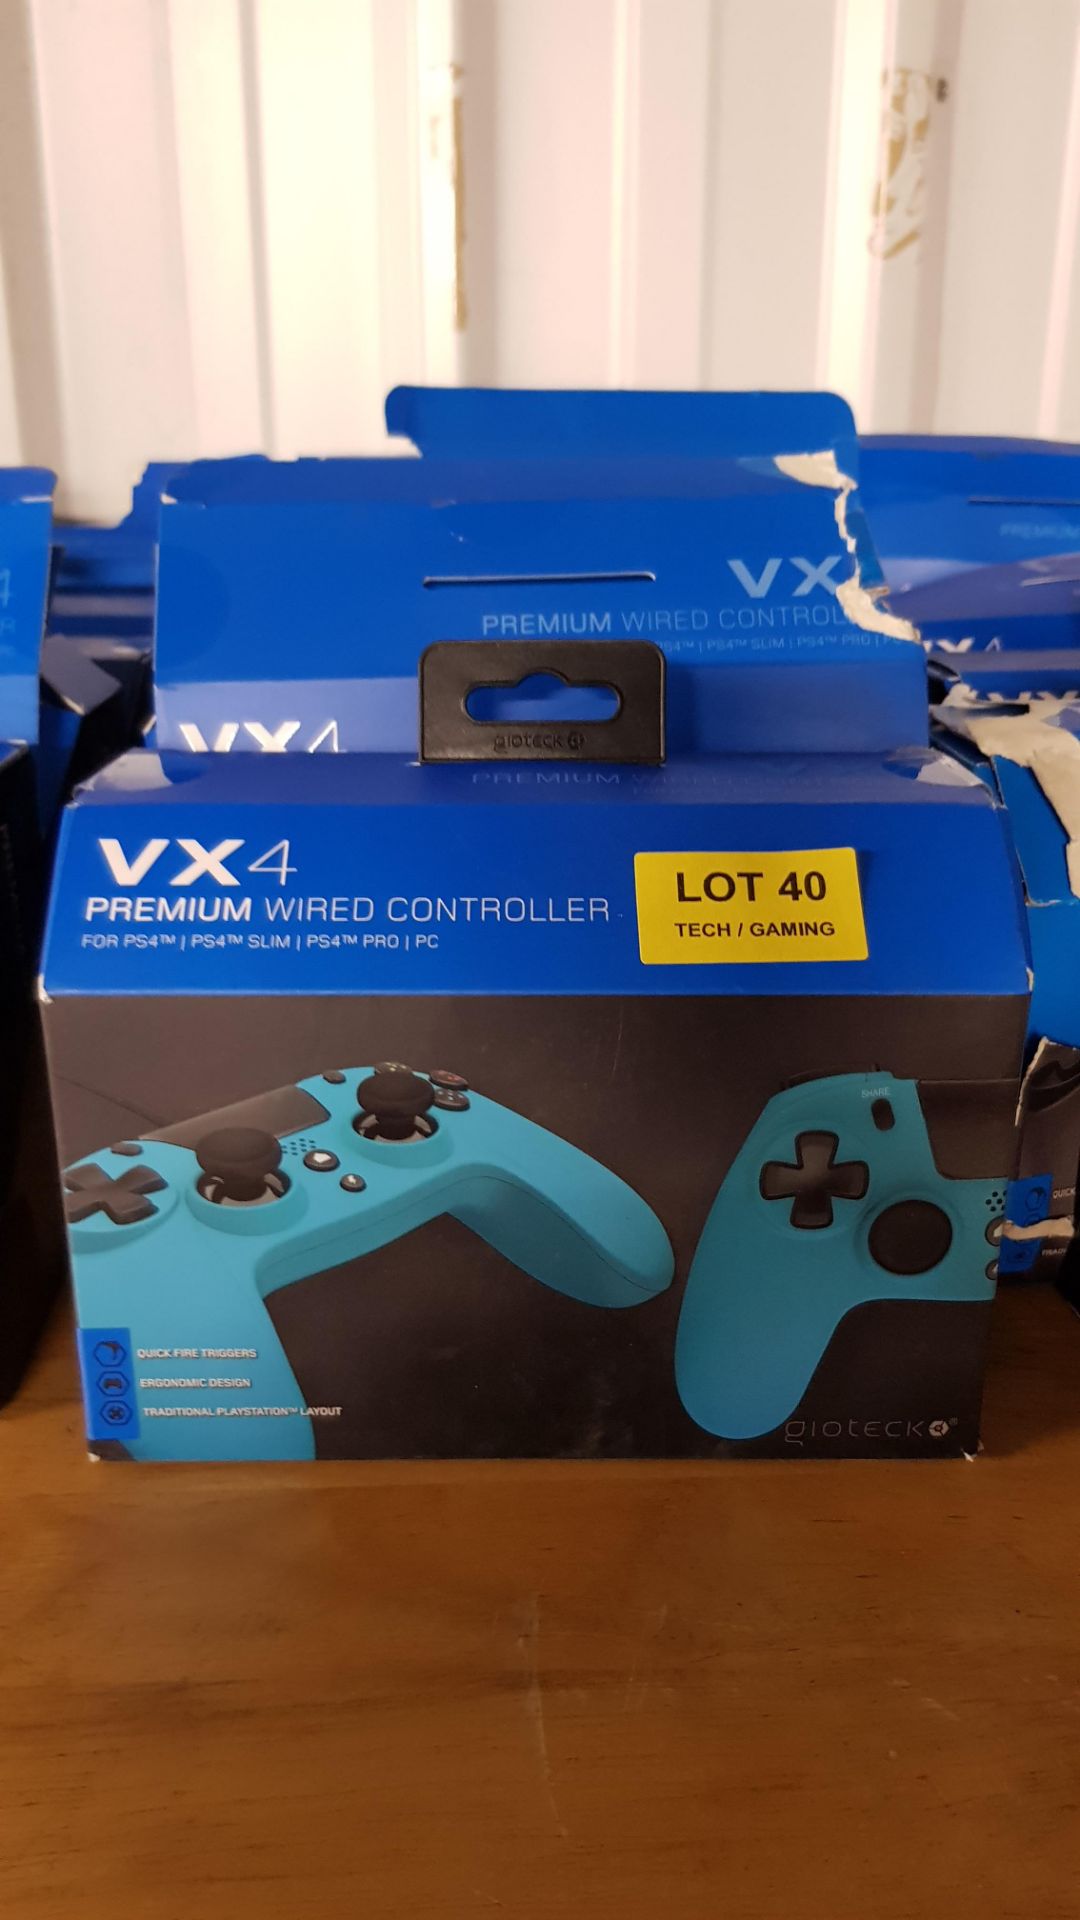 (R14D) 6x Gioteck VX4 Premium Wired Controller For PS4 & PC RRP £20 each. (6x Teal) - Image 2 of 2